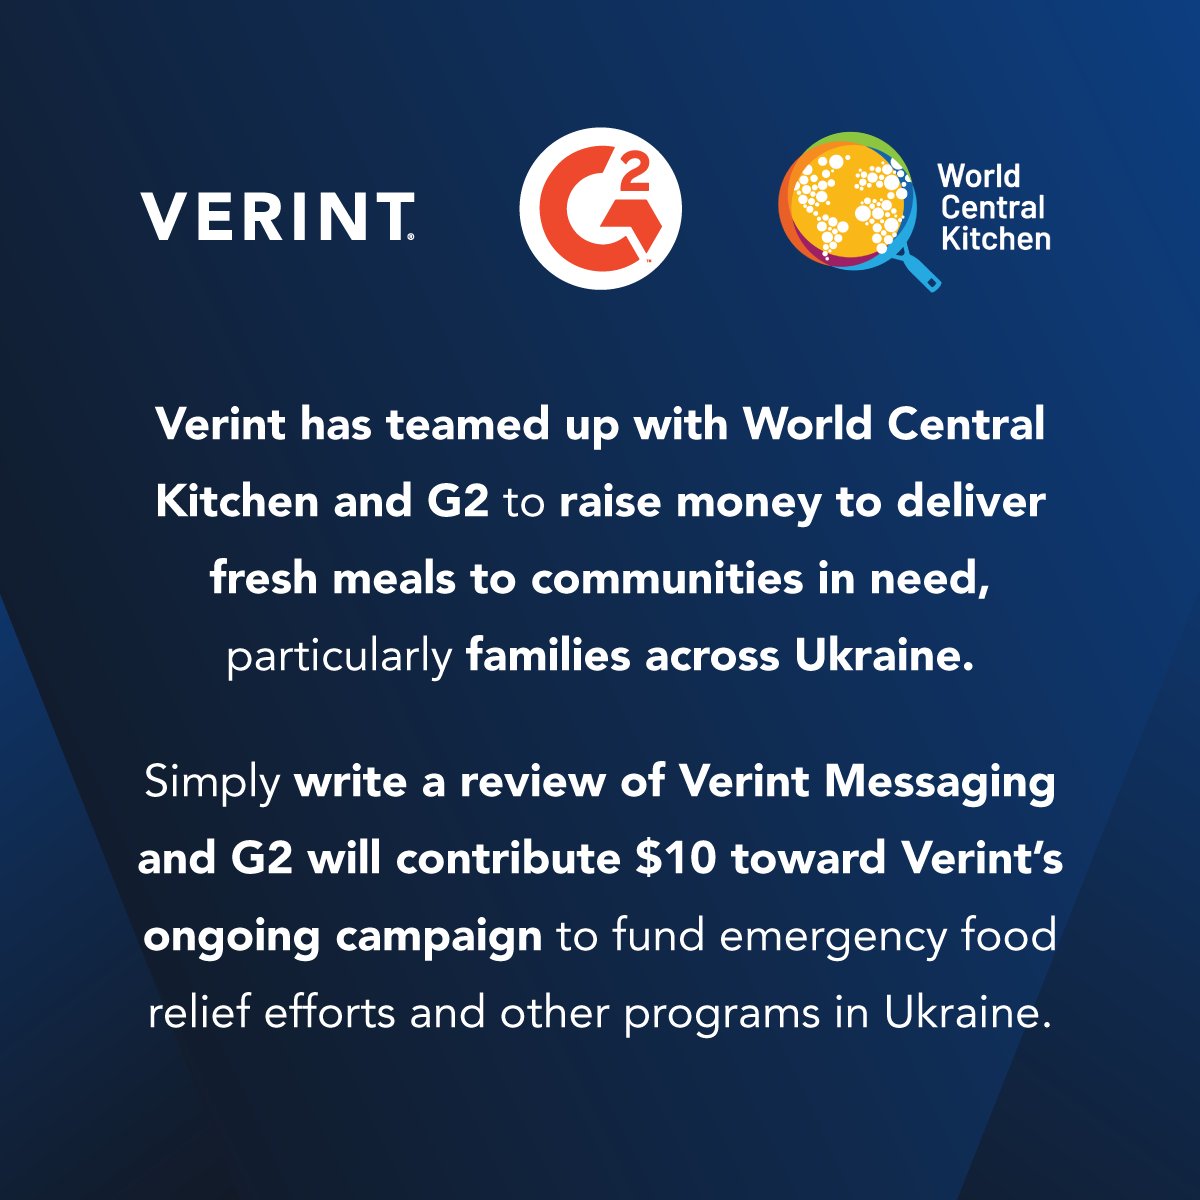 Verint has teamed up with World Central Kitchen and G2 to deliver fresh meals to communities in Ukraine. Review Verint Messaging and G2 will contribute $10 to Verint’s ongoing campaign to fund emergency food relief efforts and other programs in Ukraine. bit.ly/3ENrZh6